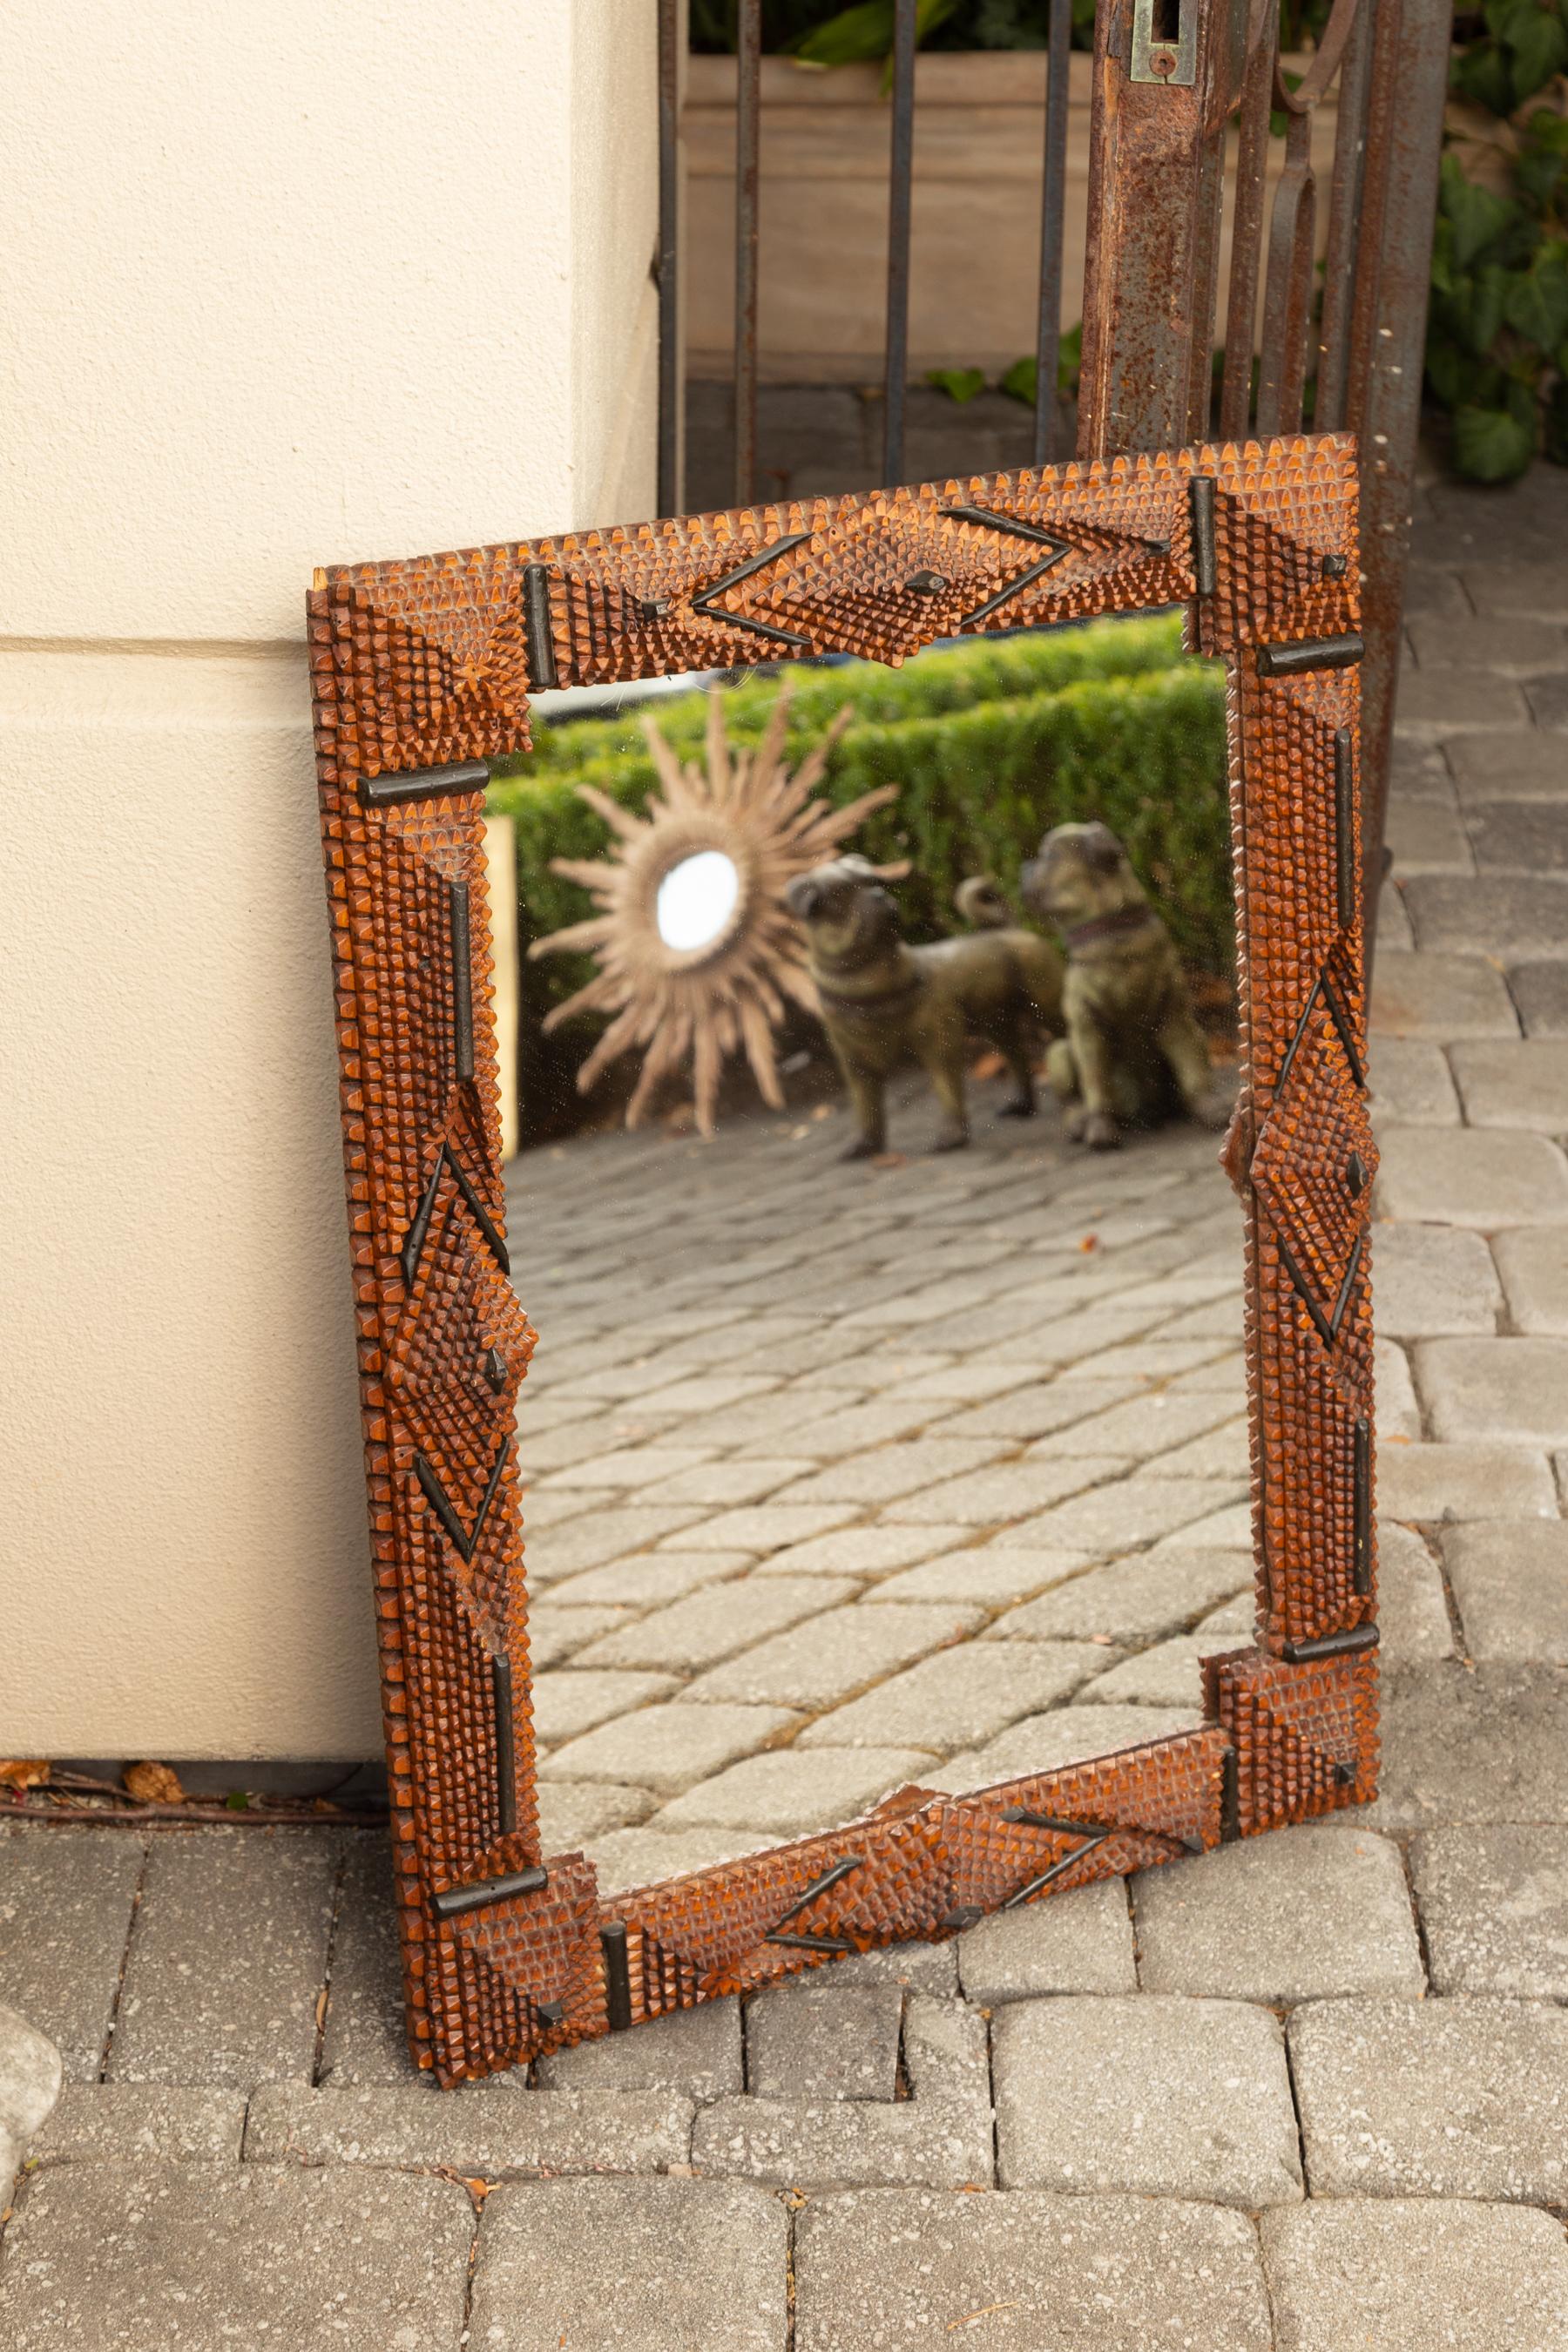 A French Tramp Art hand carved wooden mirror from the early 20th century with raised diamond motifs and ebonized accents. Born in France during the turn of the century, this French mirror was hand carved in the manner typical of the Tramp Art style.